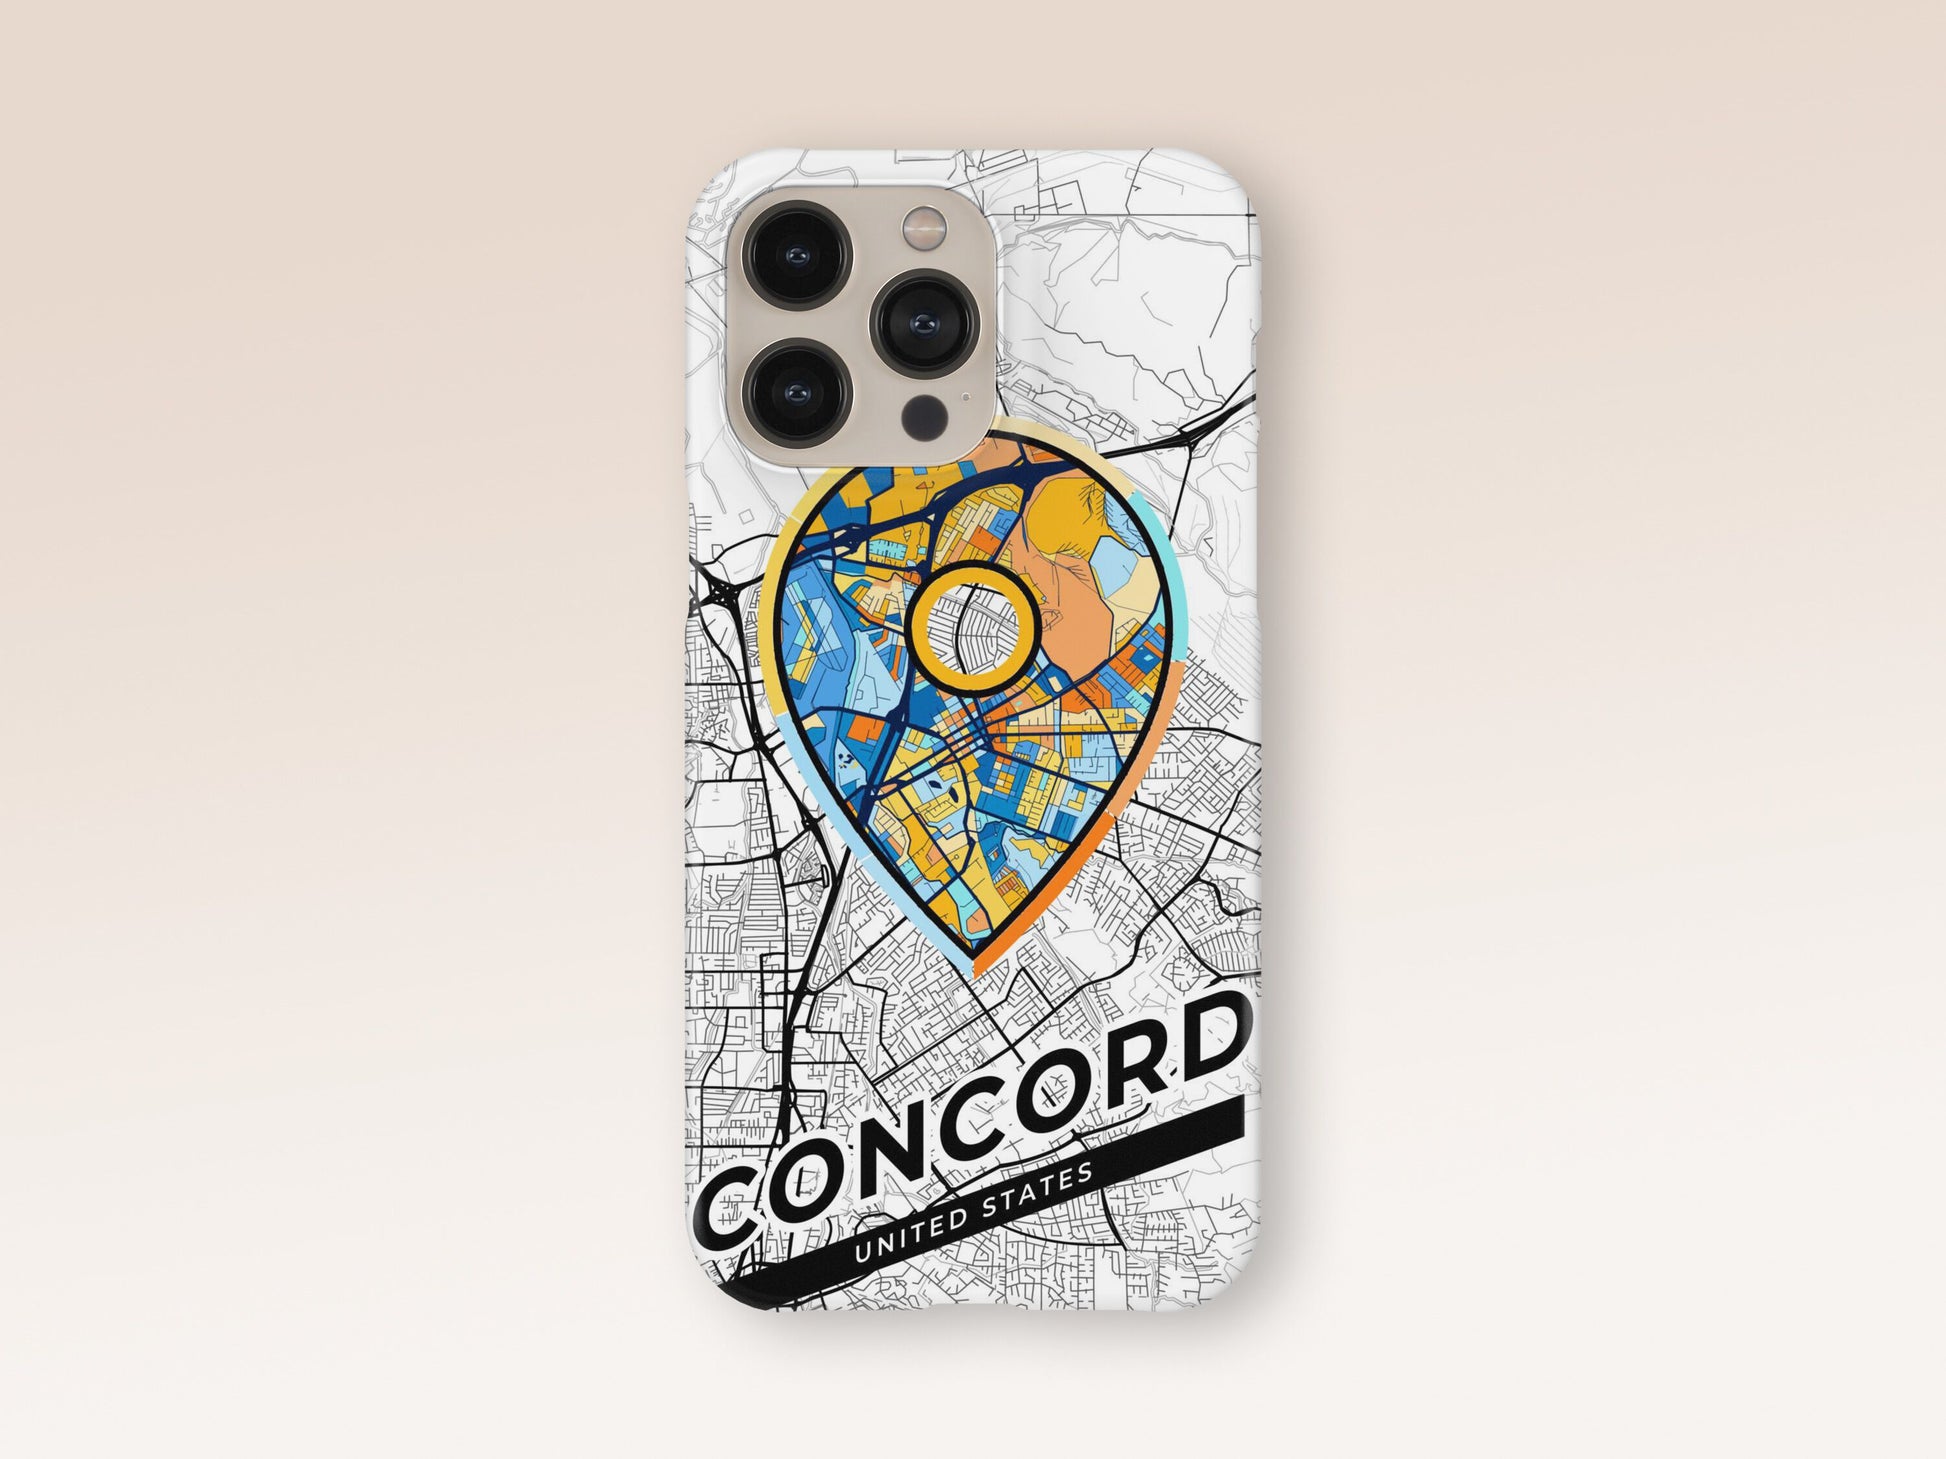 Concord California slim phone case with colorful icon. Birthday, wedding or housewarming gift. Couple match cases. 1